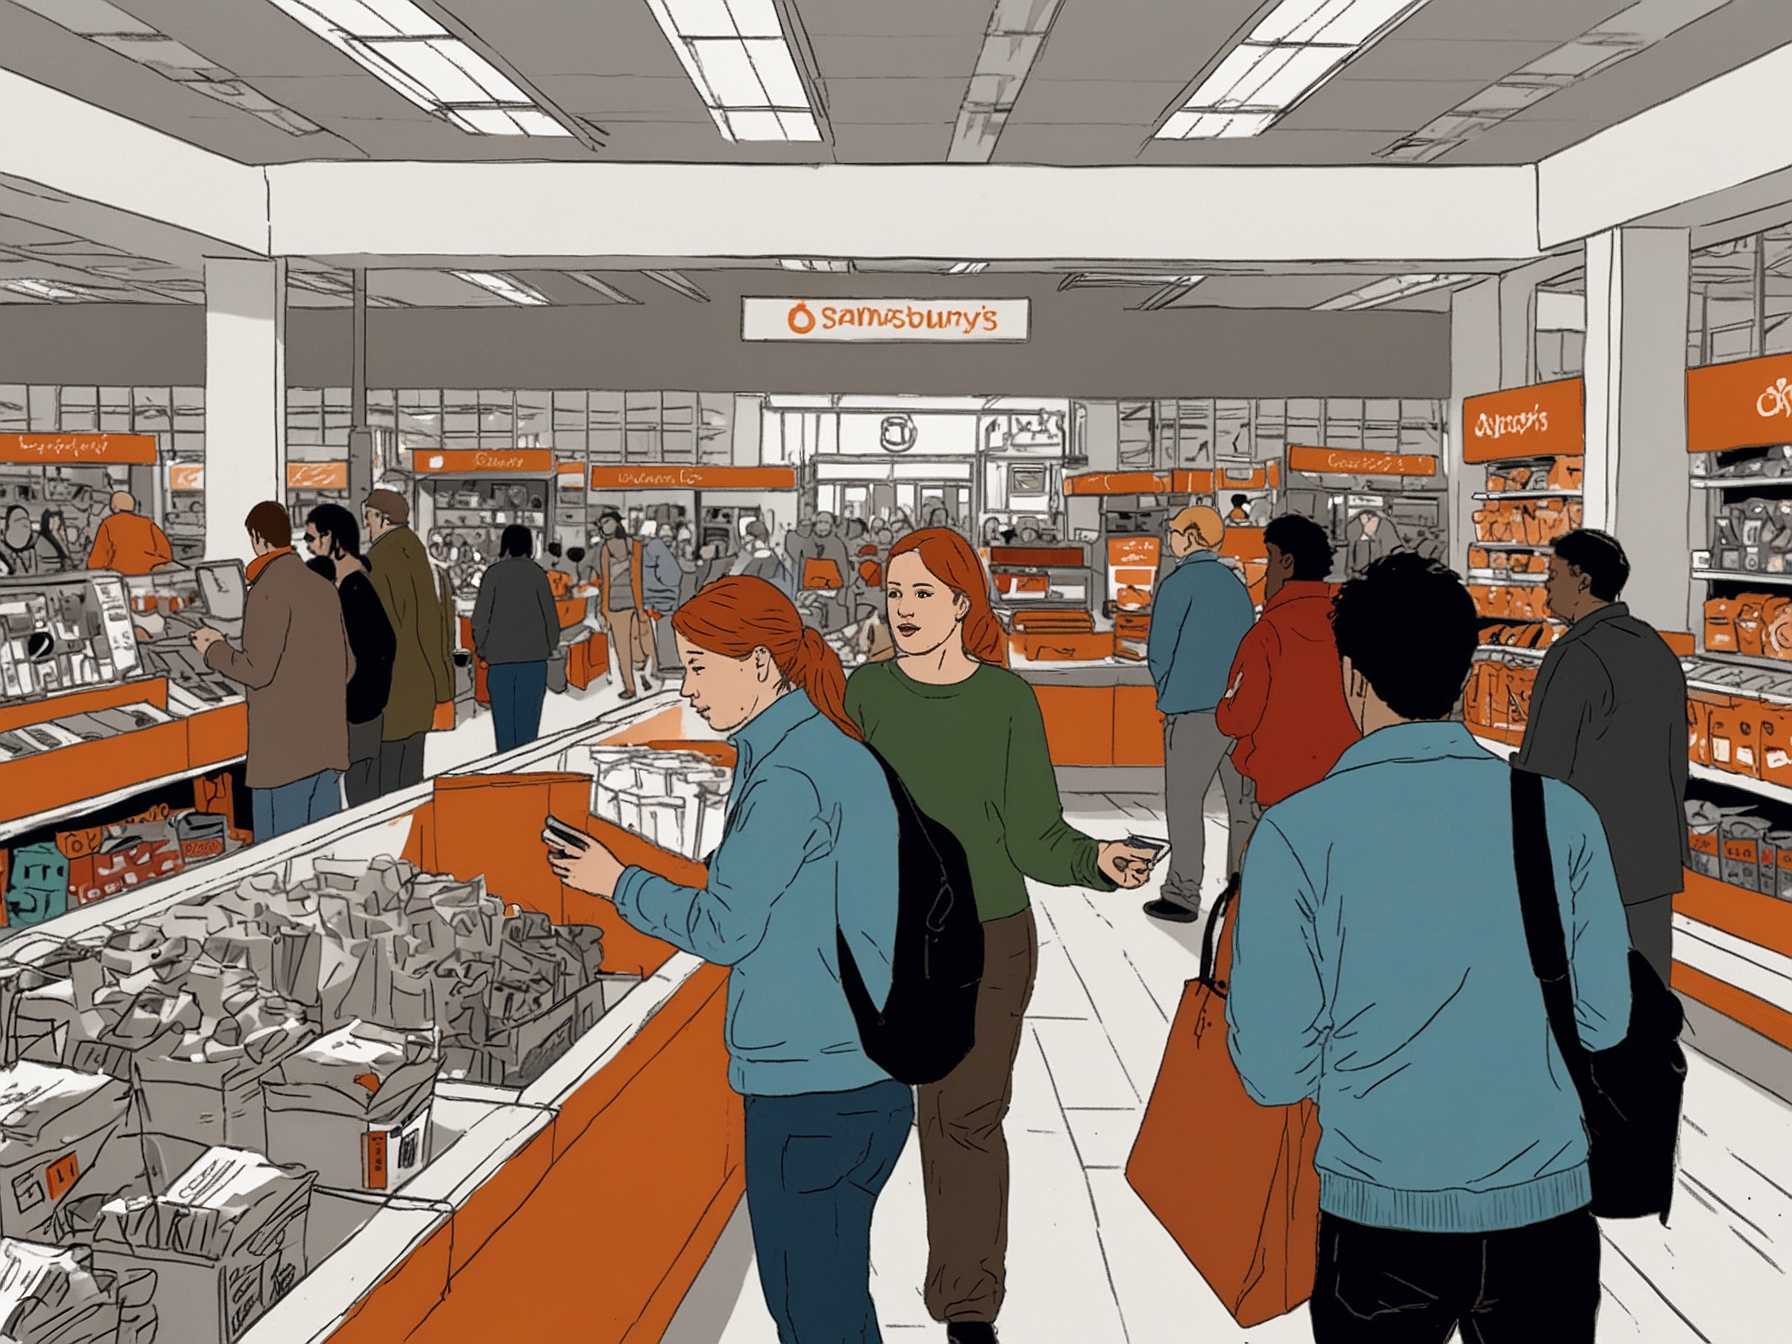 A busy Sainsbury's store with shoppers focusing on essential items, illustrating the shift in consumer priorities amidst rising living costs and economic uncertainties.